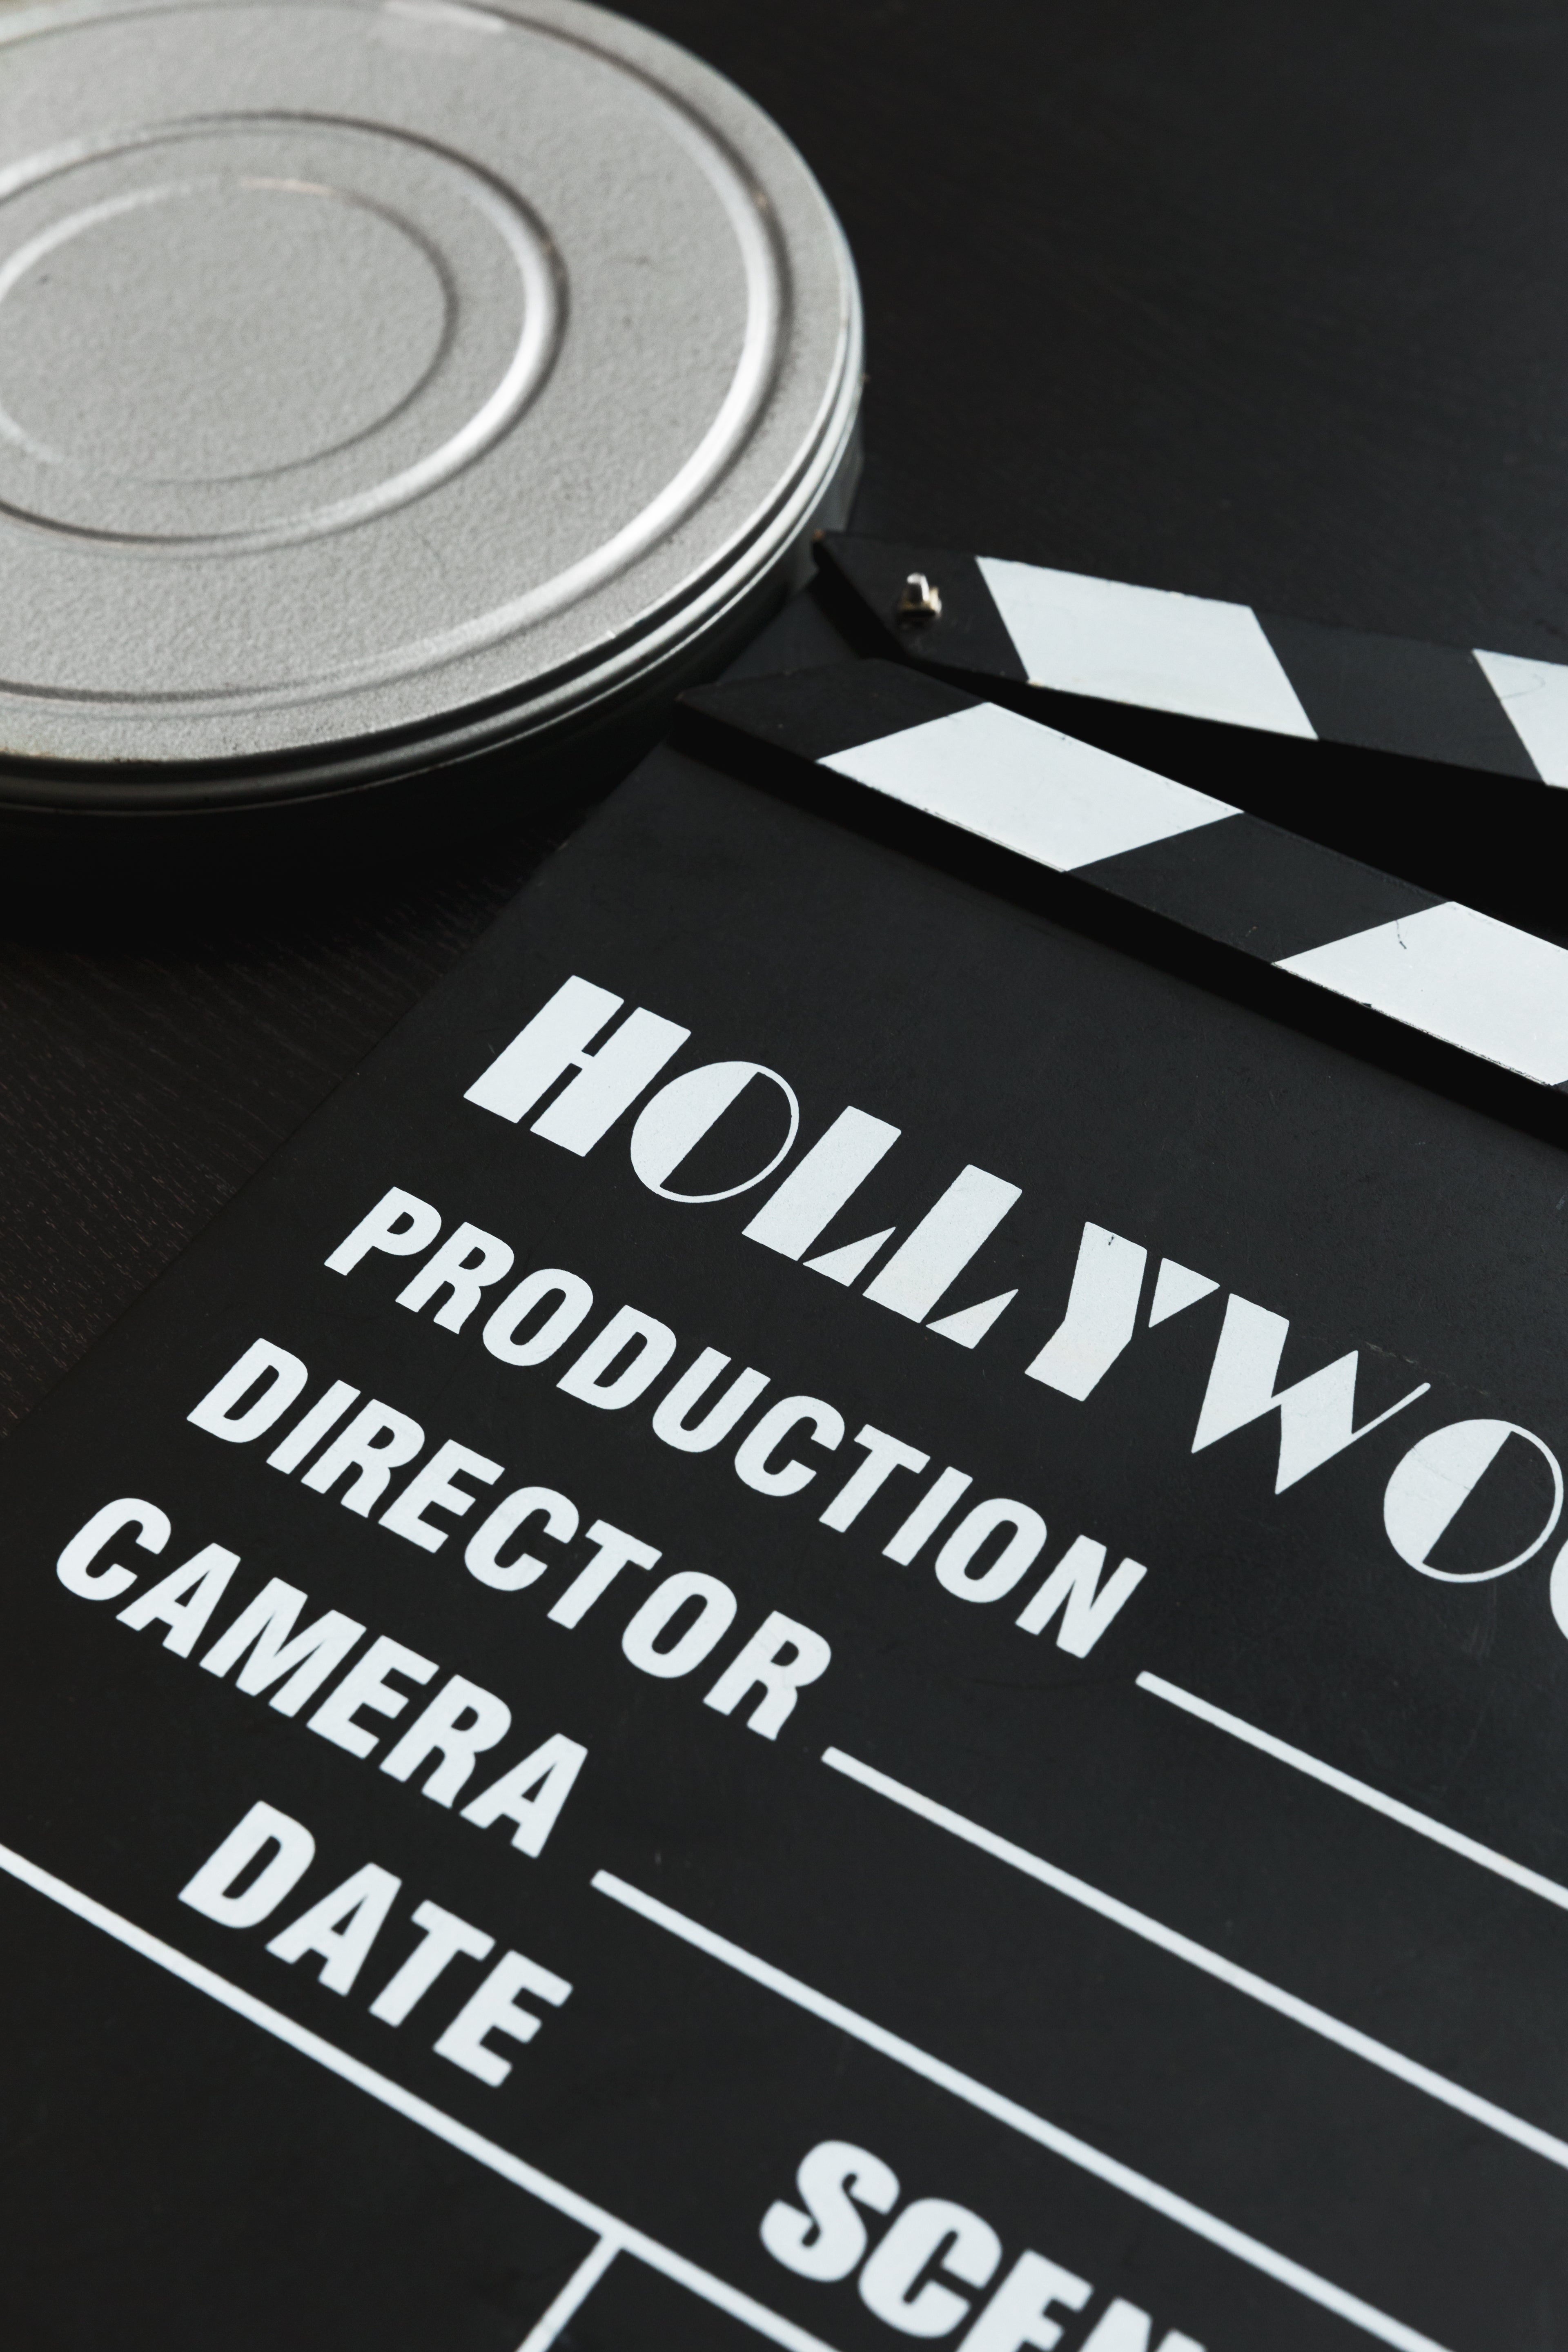 Browse Free HD Images of A Silver Film Reel Canister And A Movie Clapper  Board